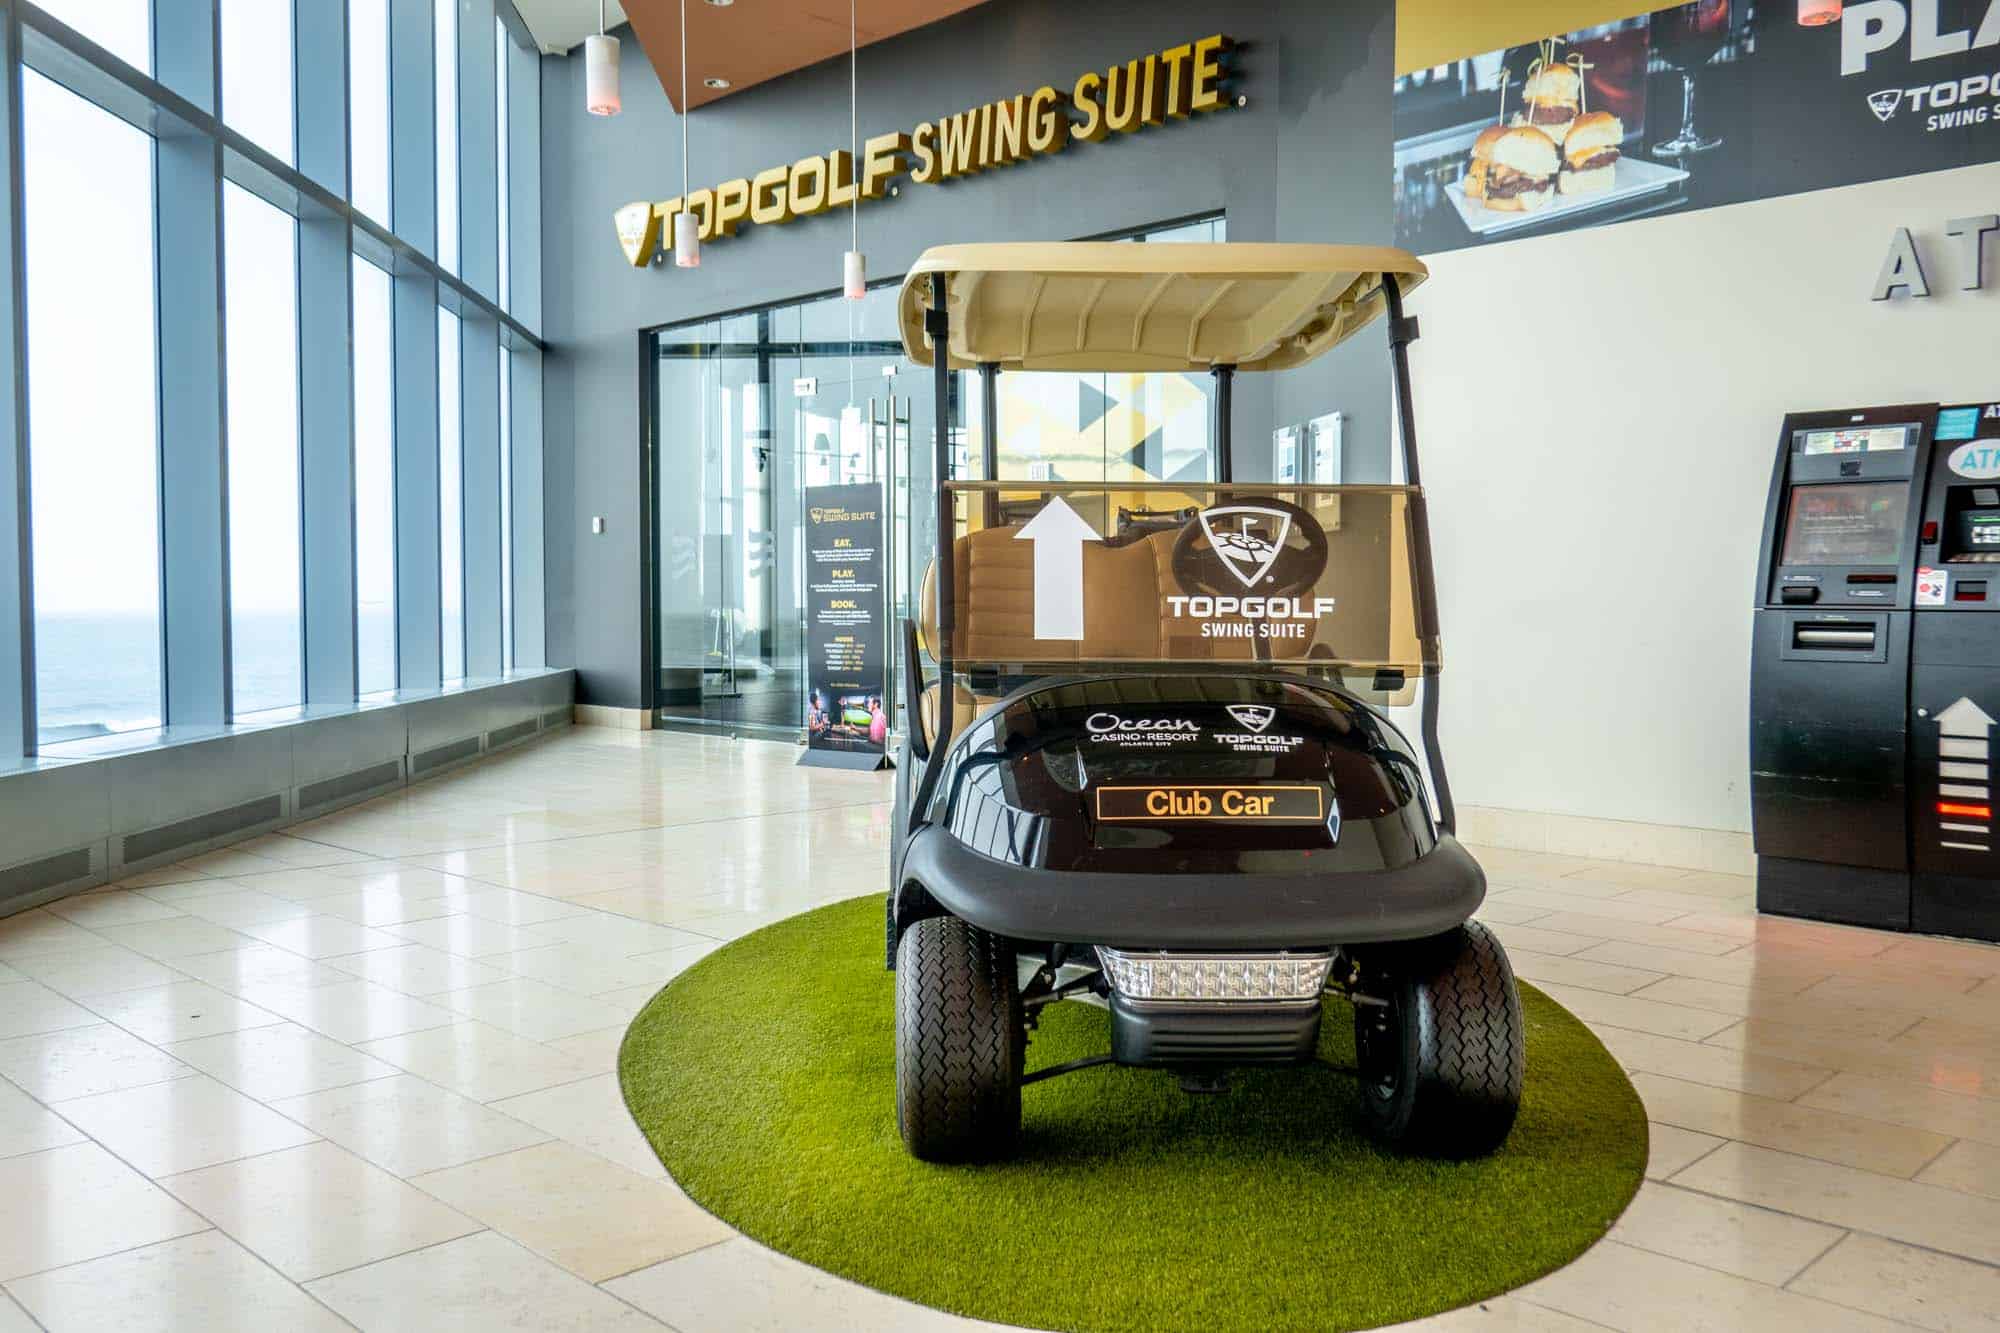 Golf cart outside the entrance to Topgolf Swing Suite.